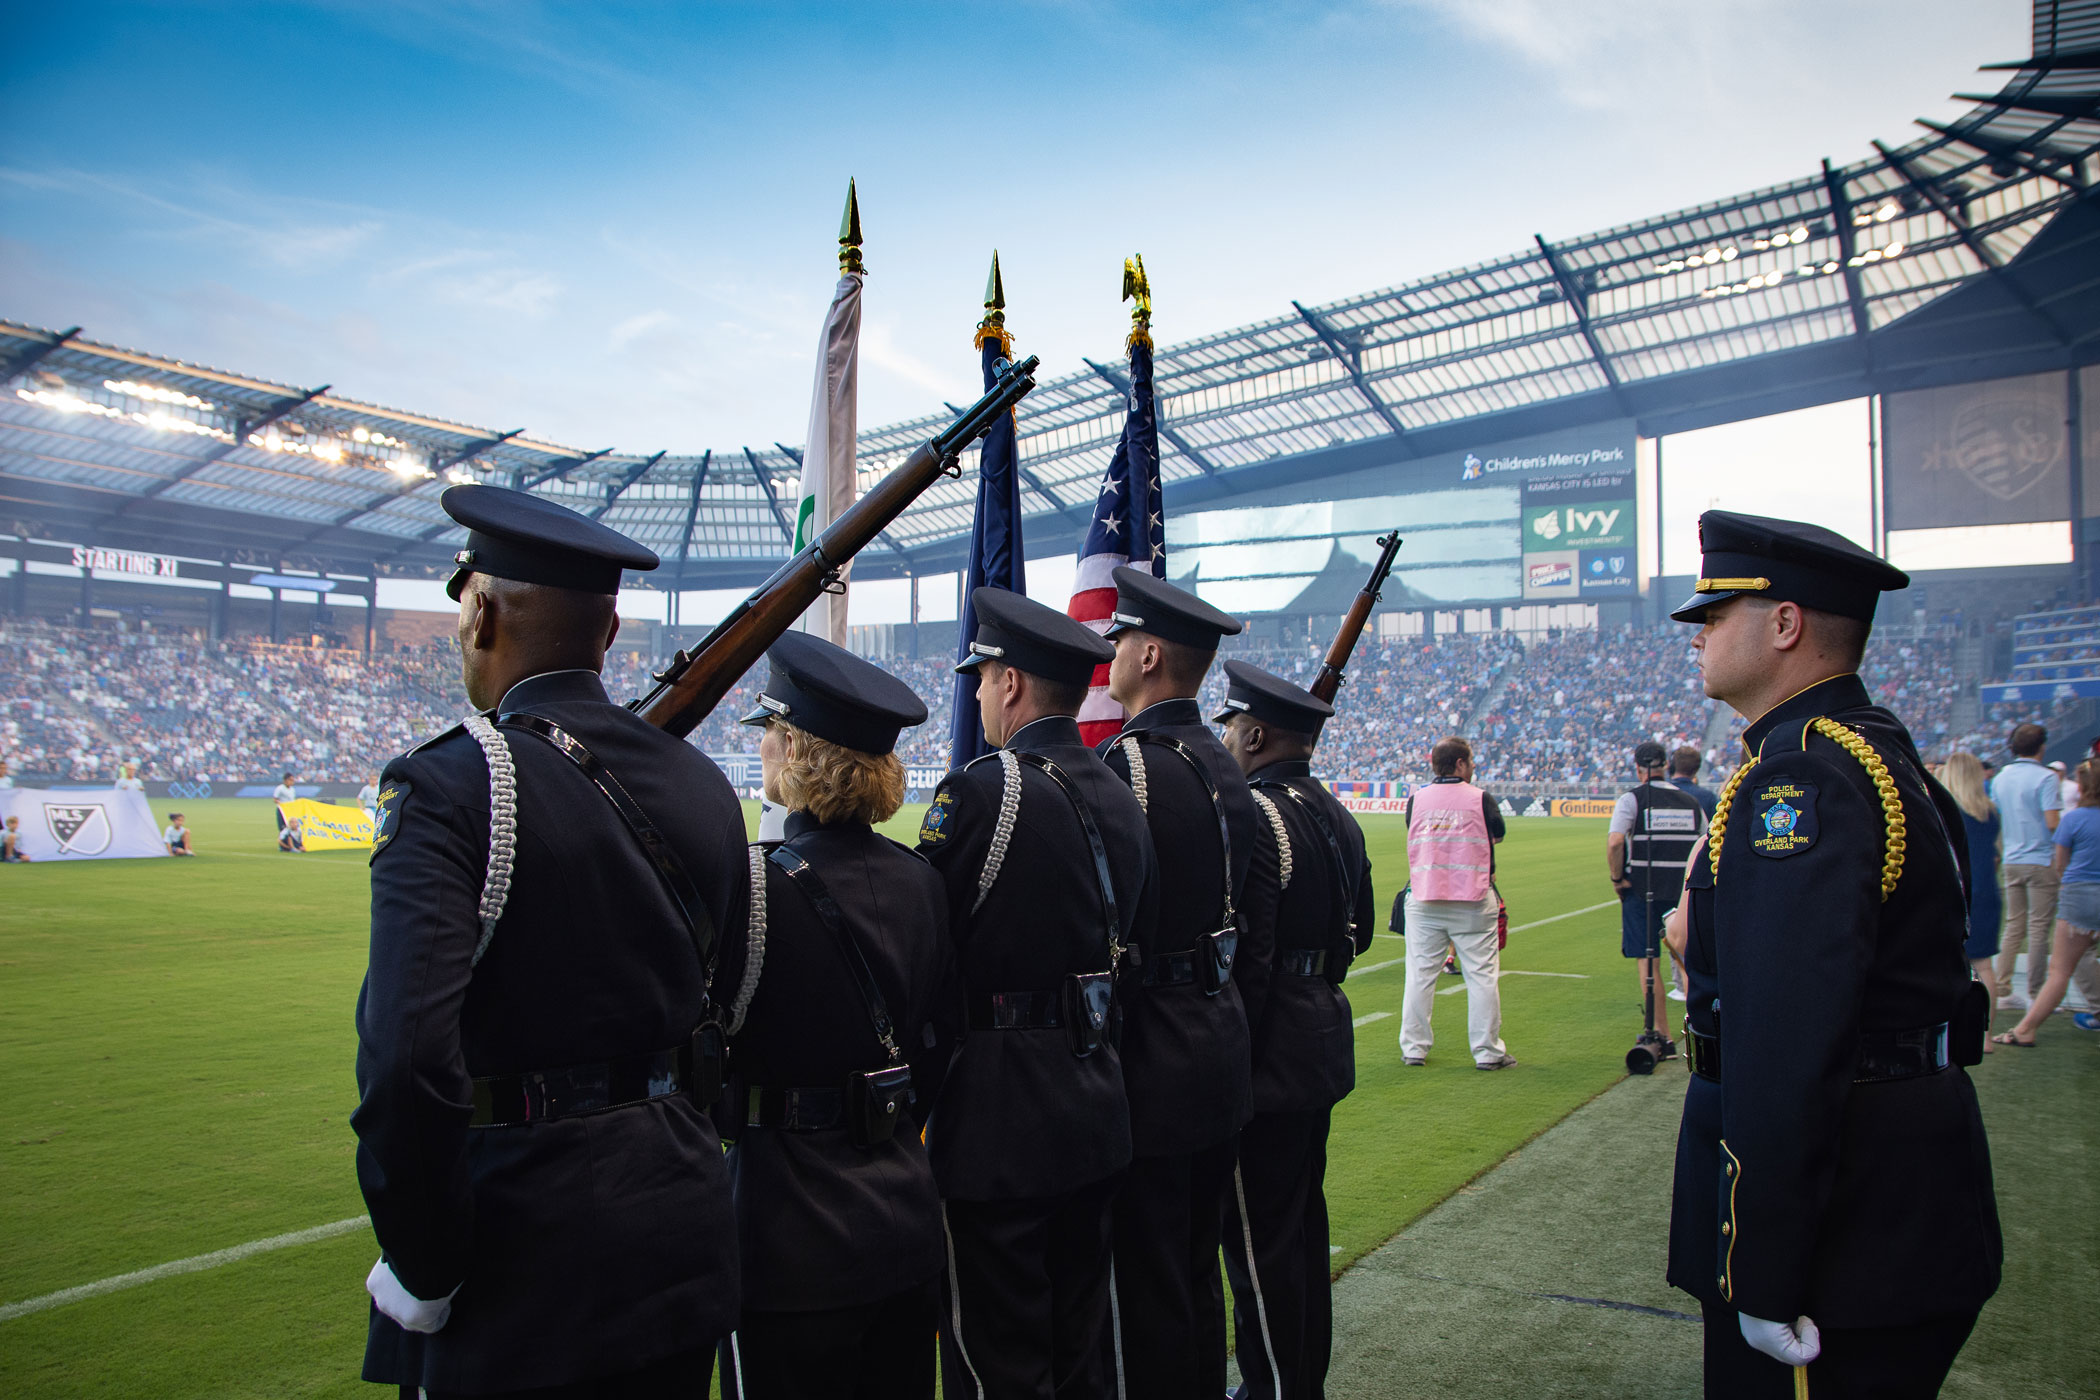 Overland Park Police Department color guard waits at attention to enter Sporting KC field